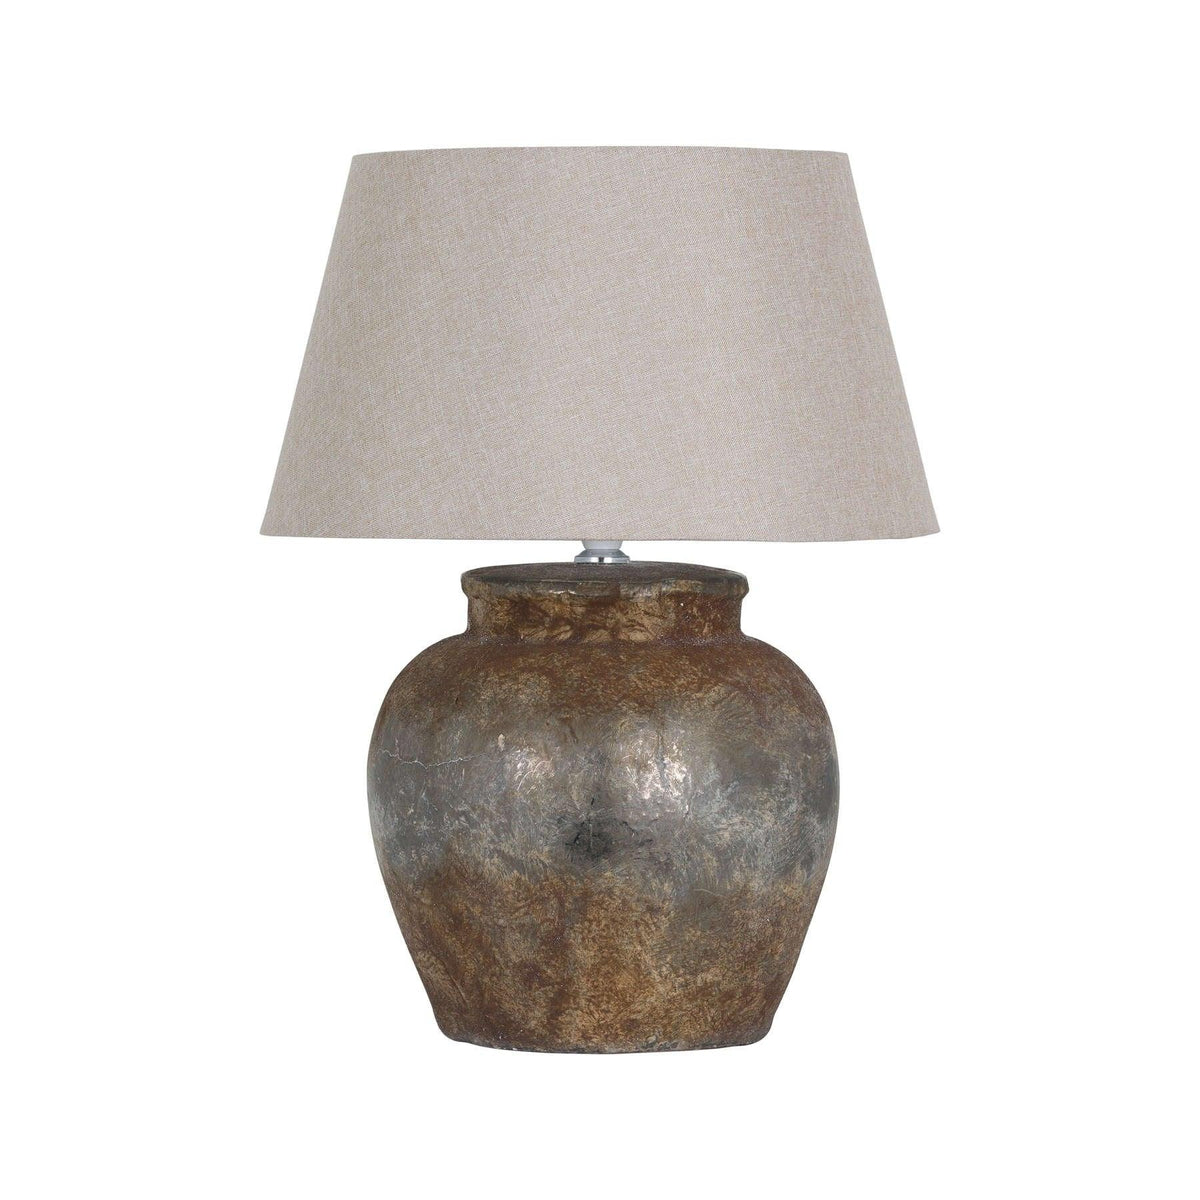 Castello Aged Stone Ceramic Table Lamp - Vookoo Lifestyle